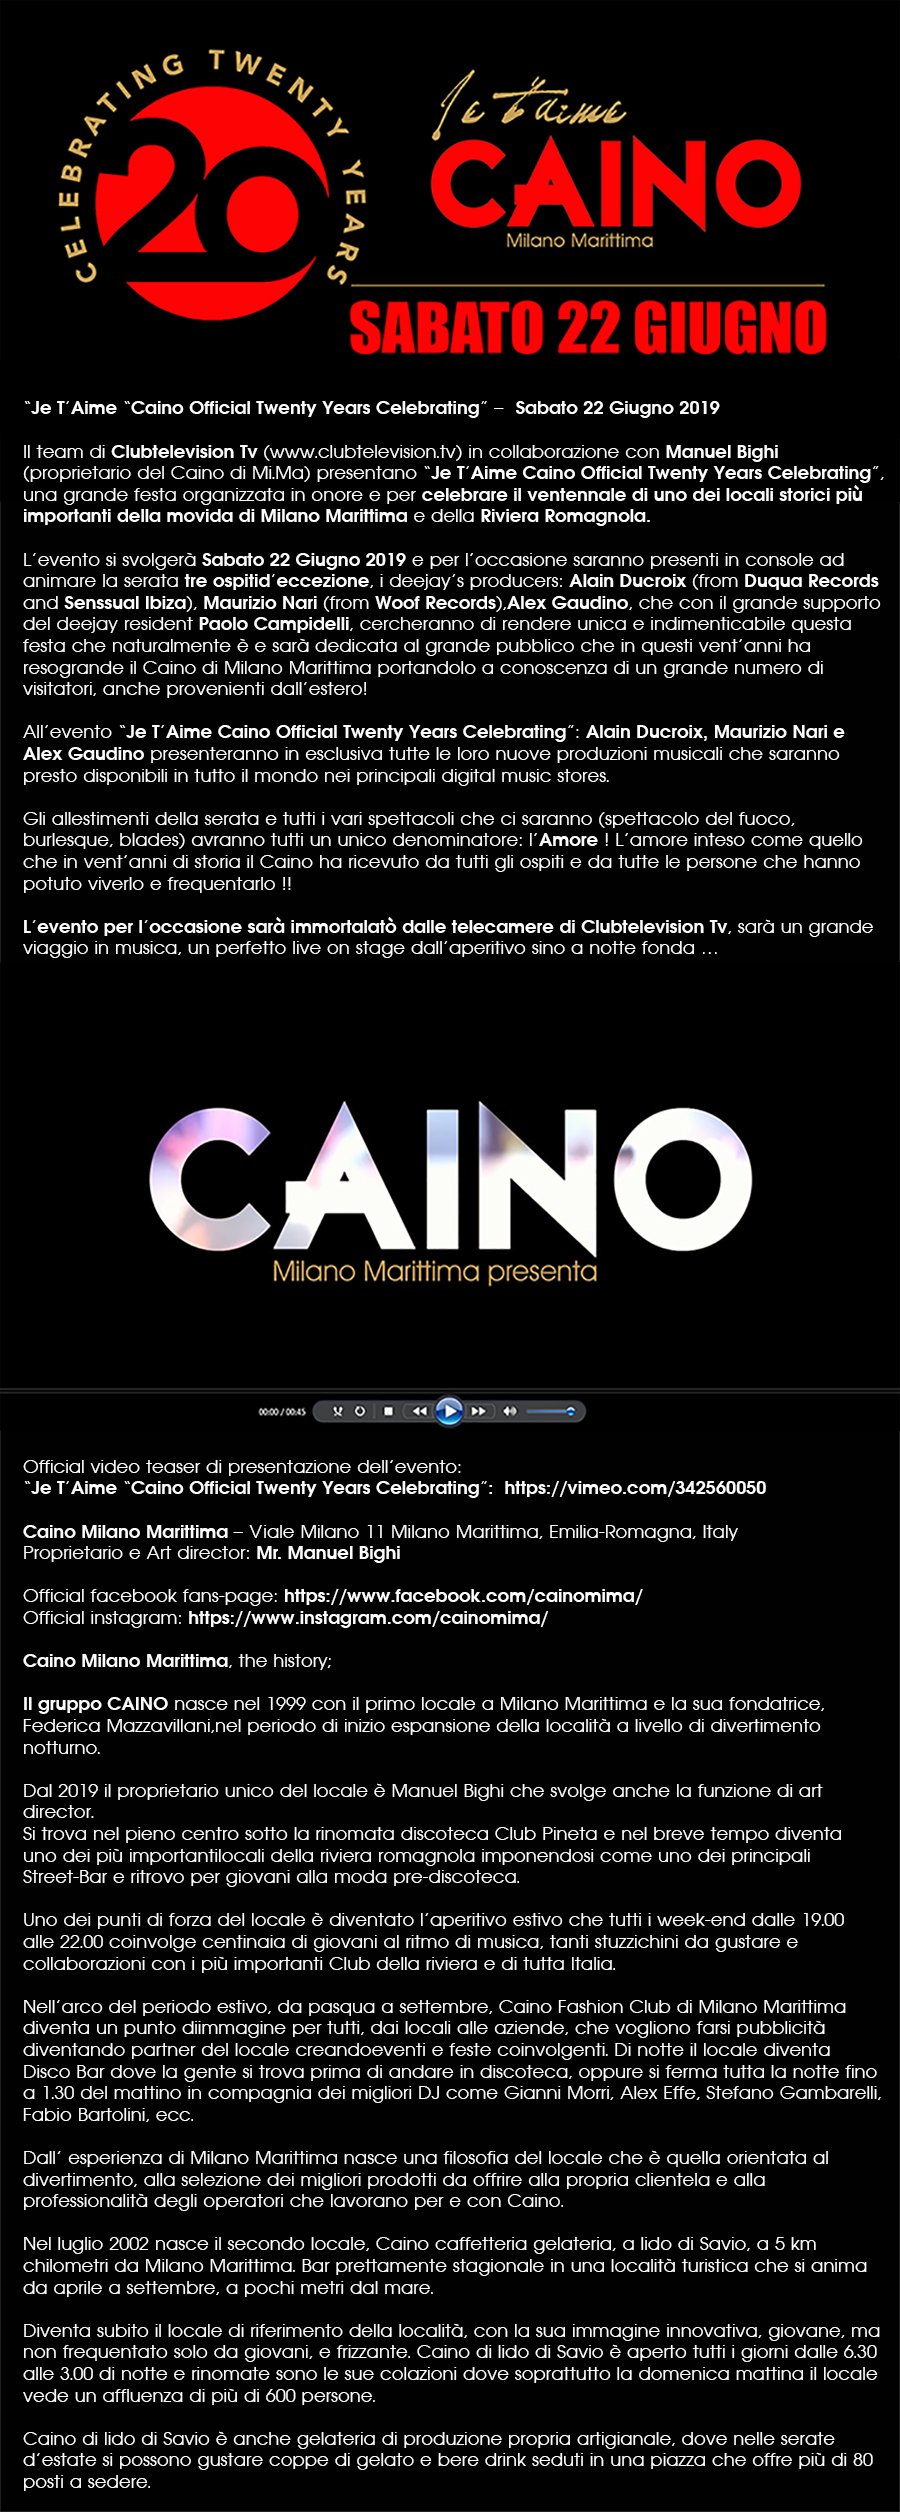 caino-page-official